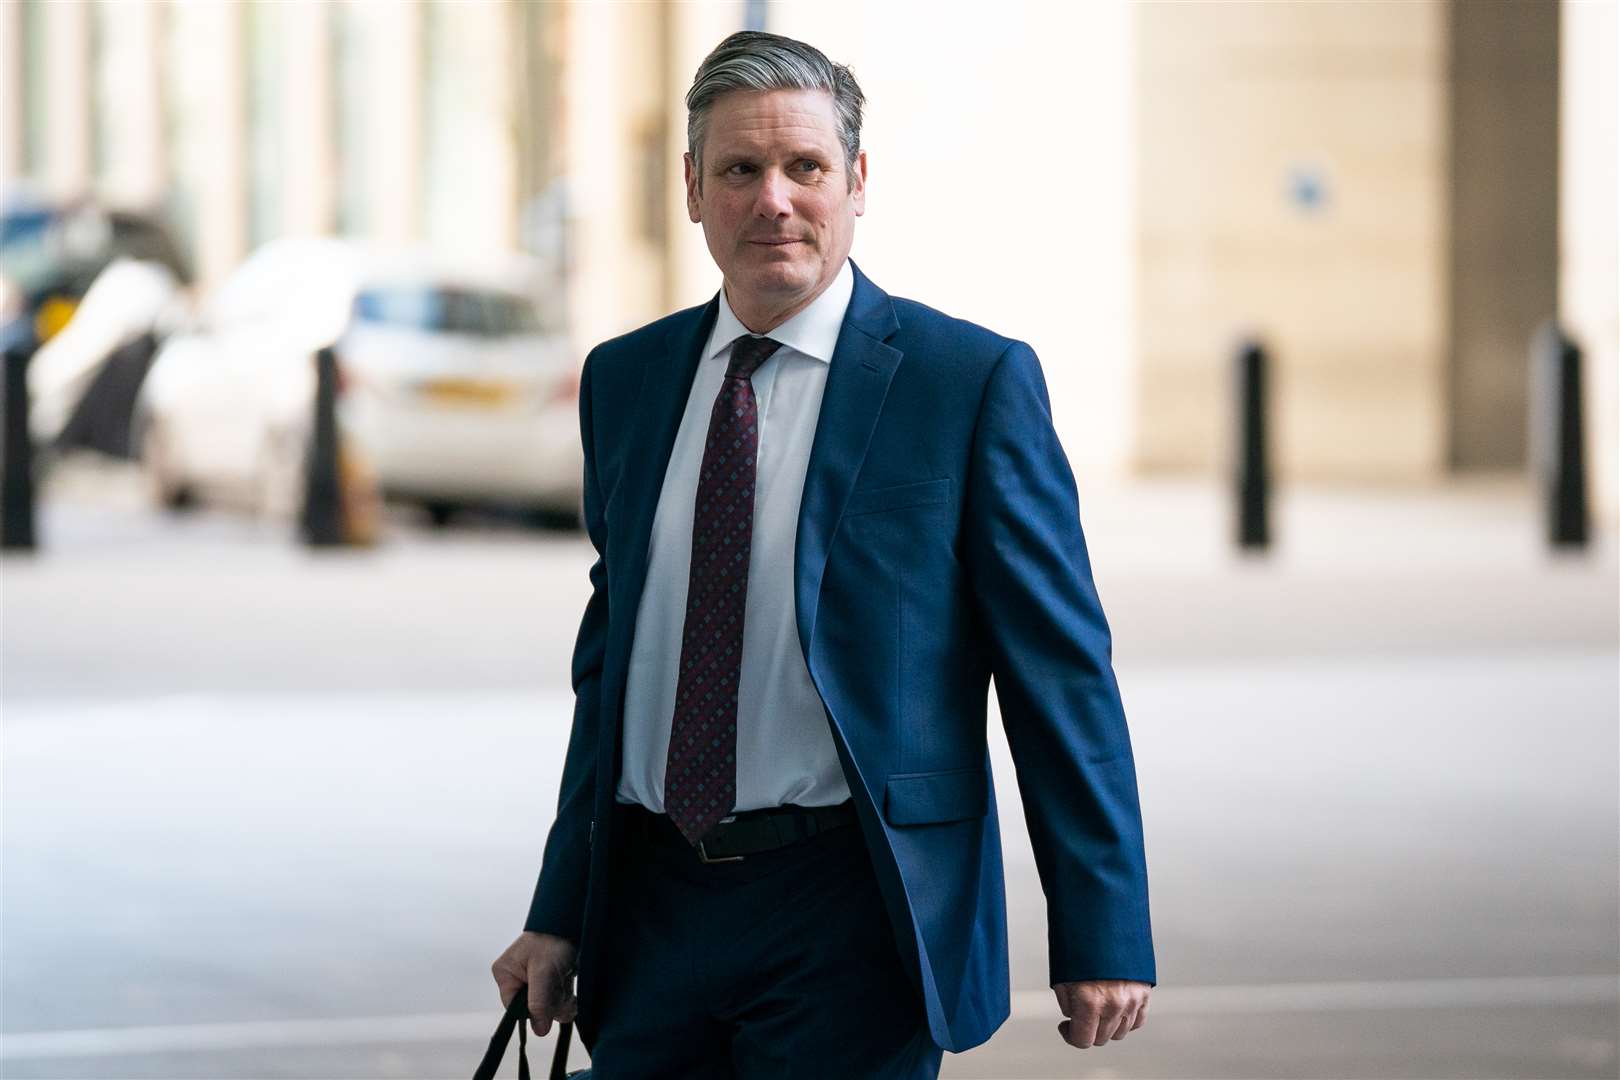 Keir Starmer and other politicians have wished the PM well (Aaron Chown/PA)